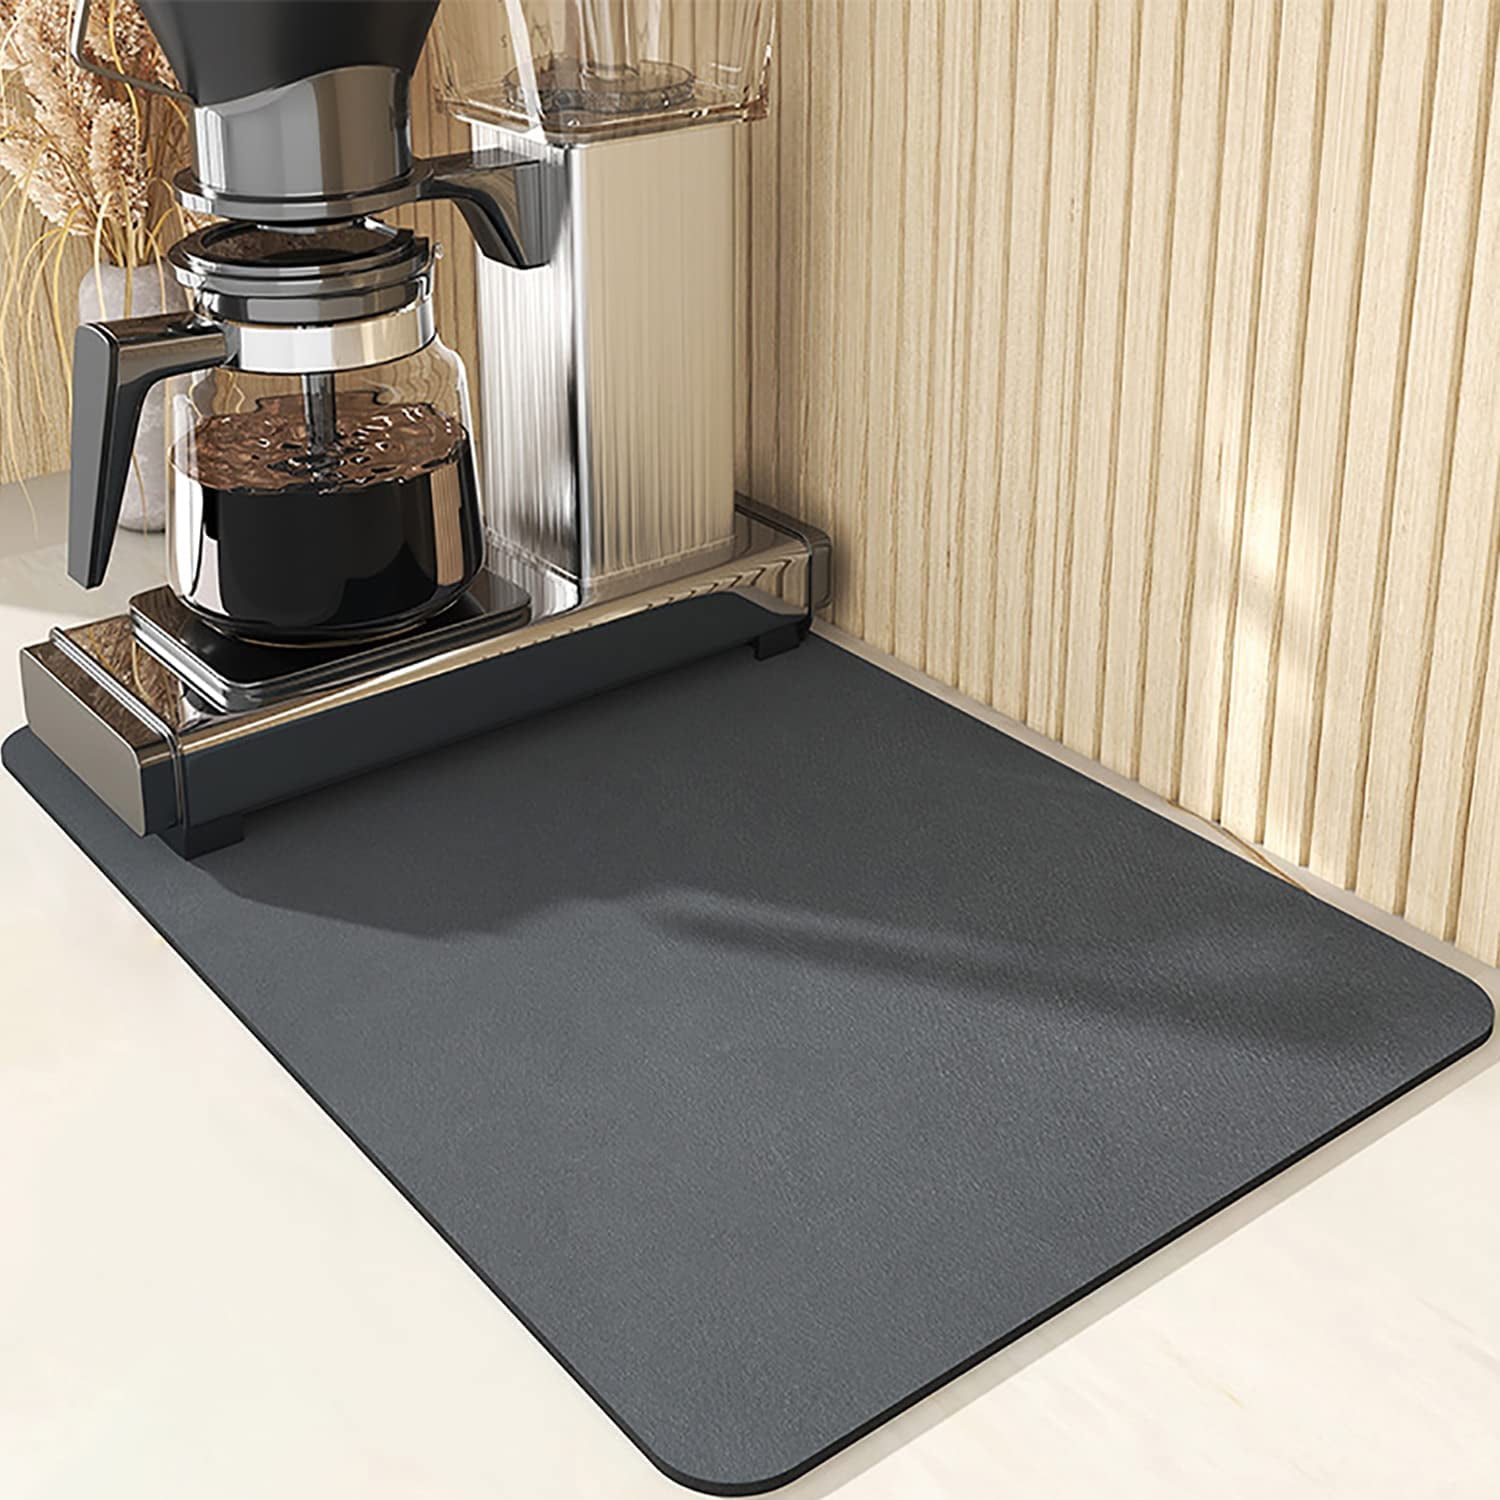 HotLive Coffee Mat - Coffee Bar Mat for Countertops | Coffee Bar Accessories Fit Under Coffee Maker Espresso Machine | Absorbent Hide Stain Rubber